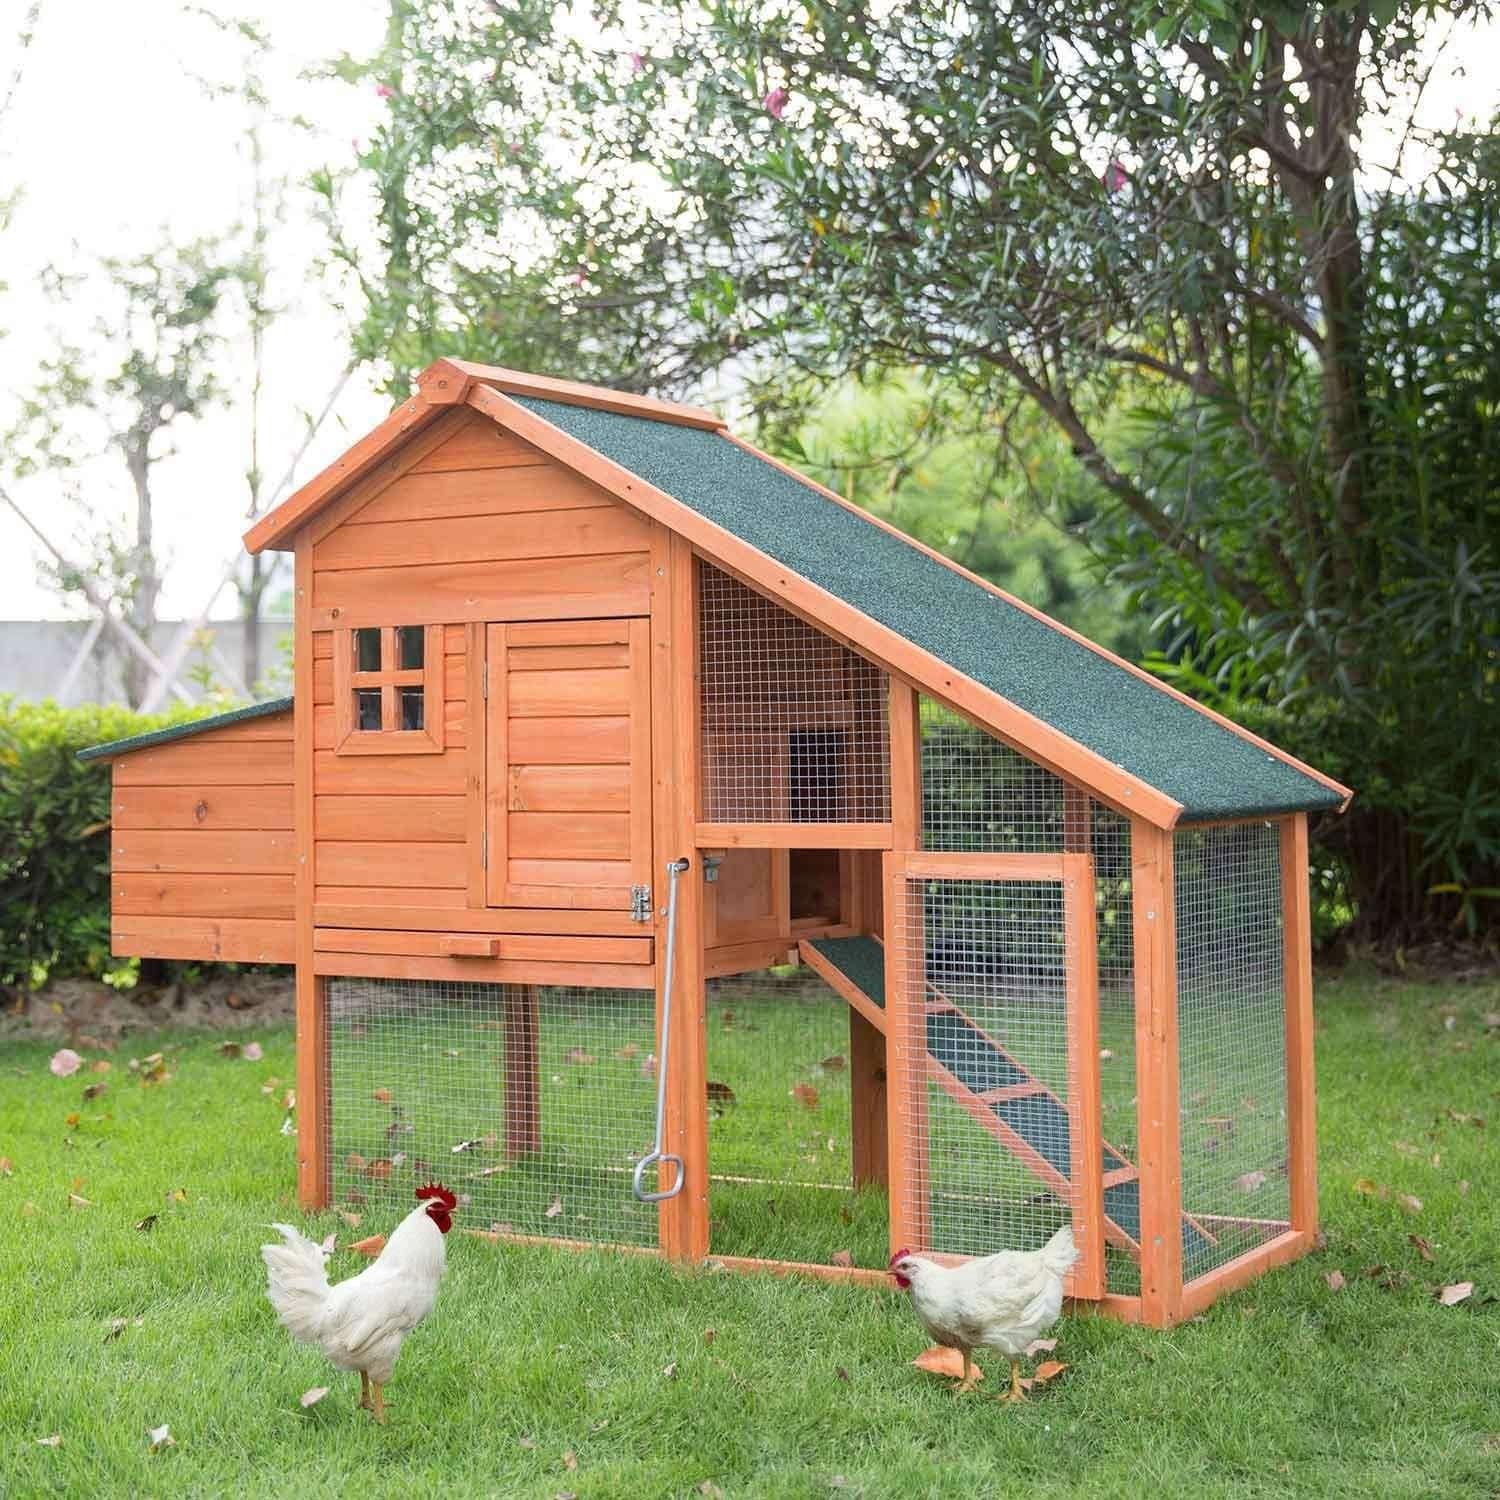 Kinbor 46 Wooden Chicken Coop Hen House Poultry Cage With Removable Tray Ramp